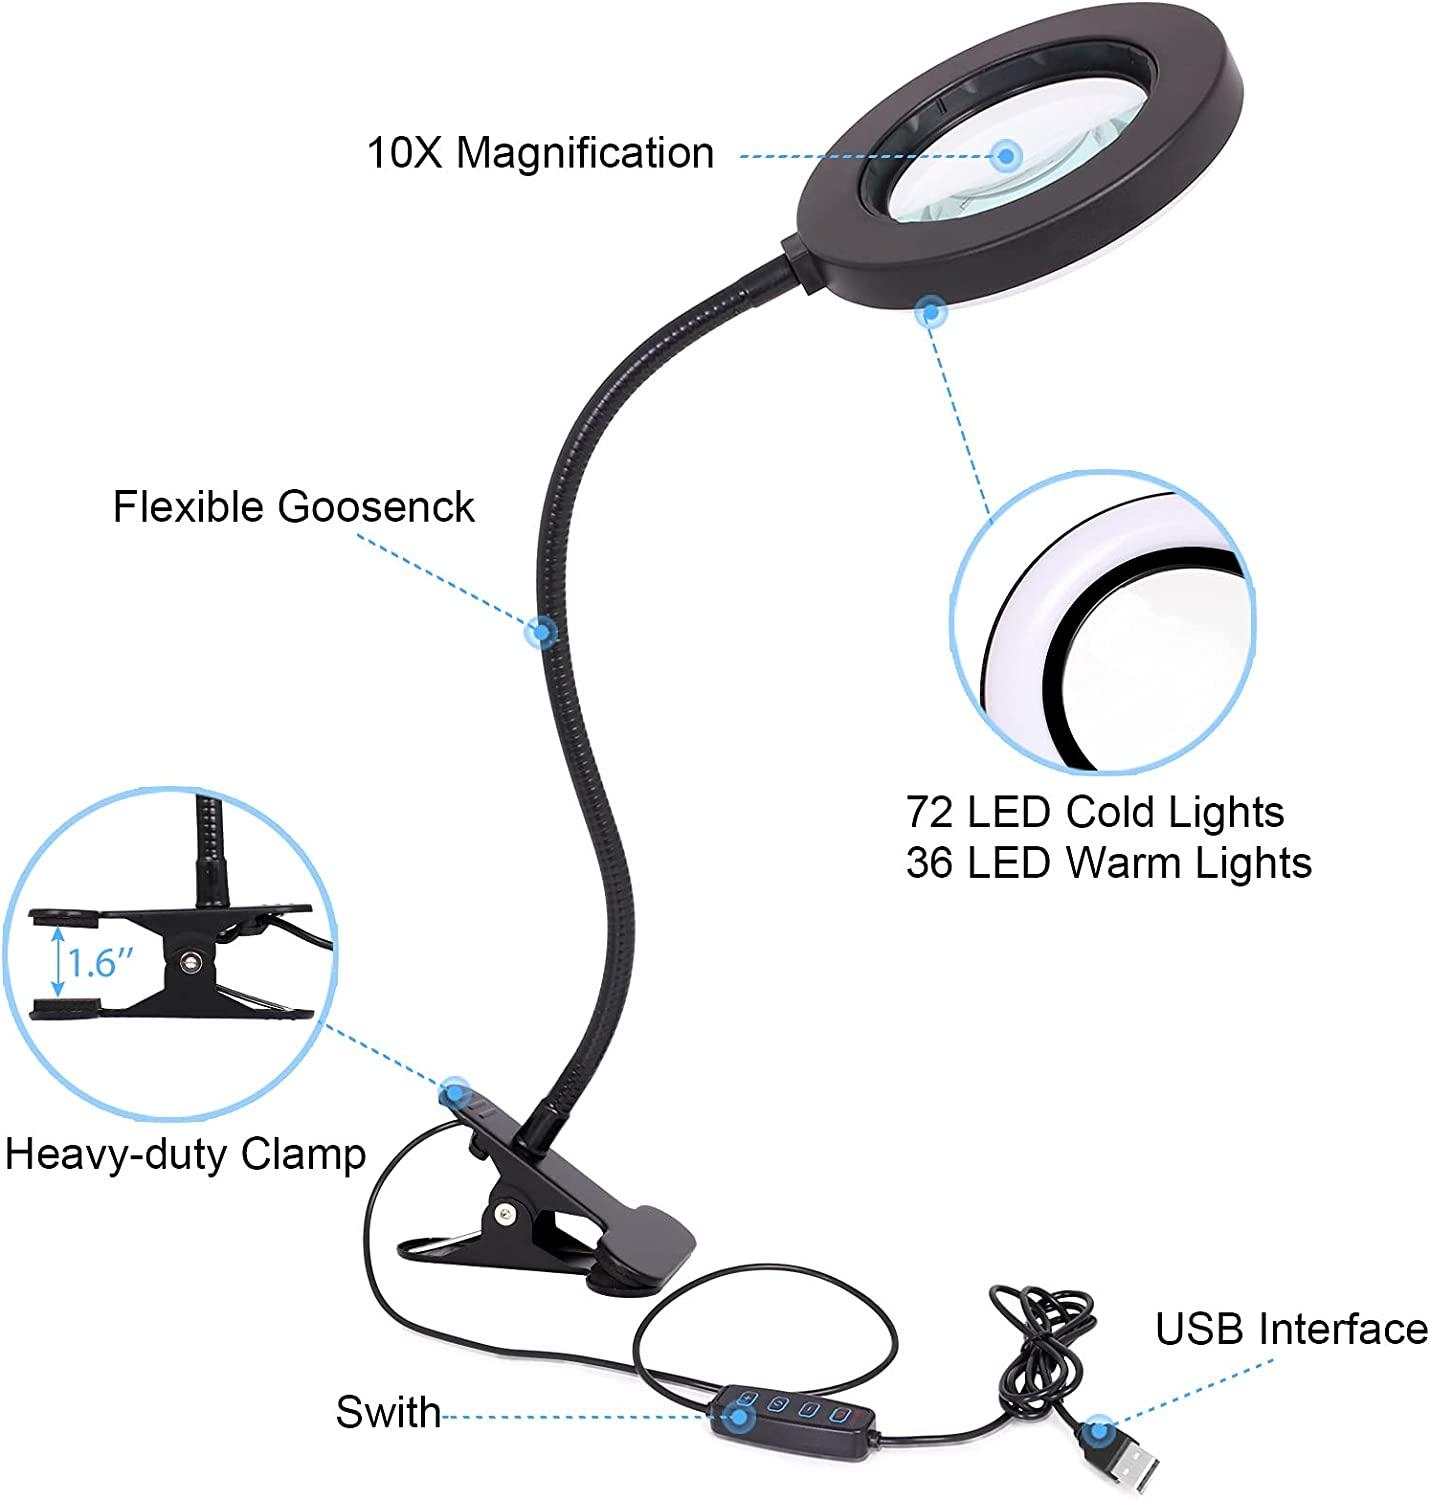 Magnifying Lamp,Flexible Clip-on Desk Table Top Magnifier Light,Magnifier  Glass for Reading and Repairing,Desk Lamp Lighted Magnifier Magnifying  Glass